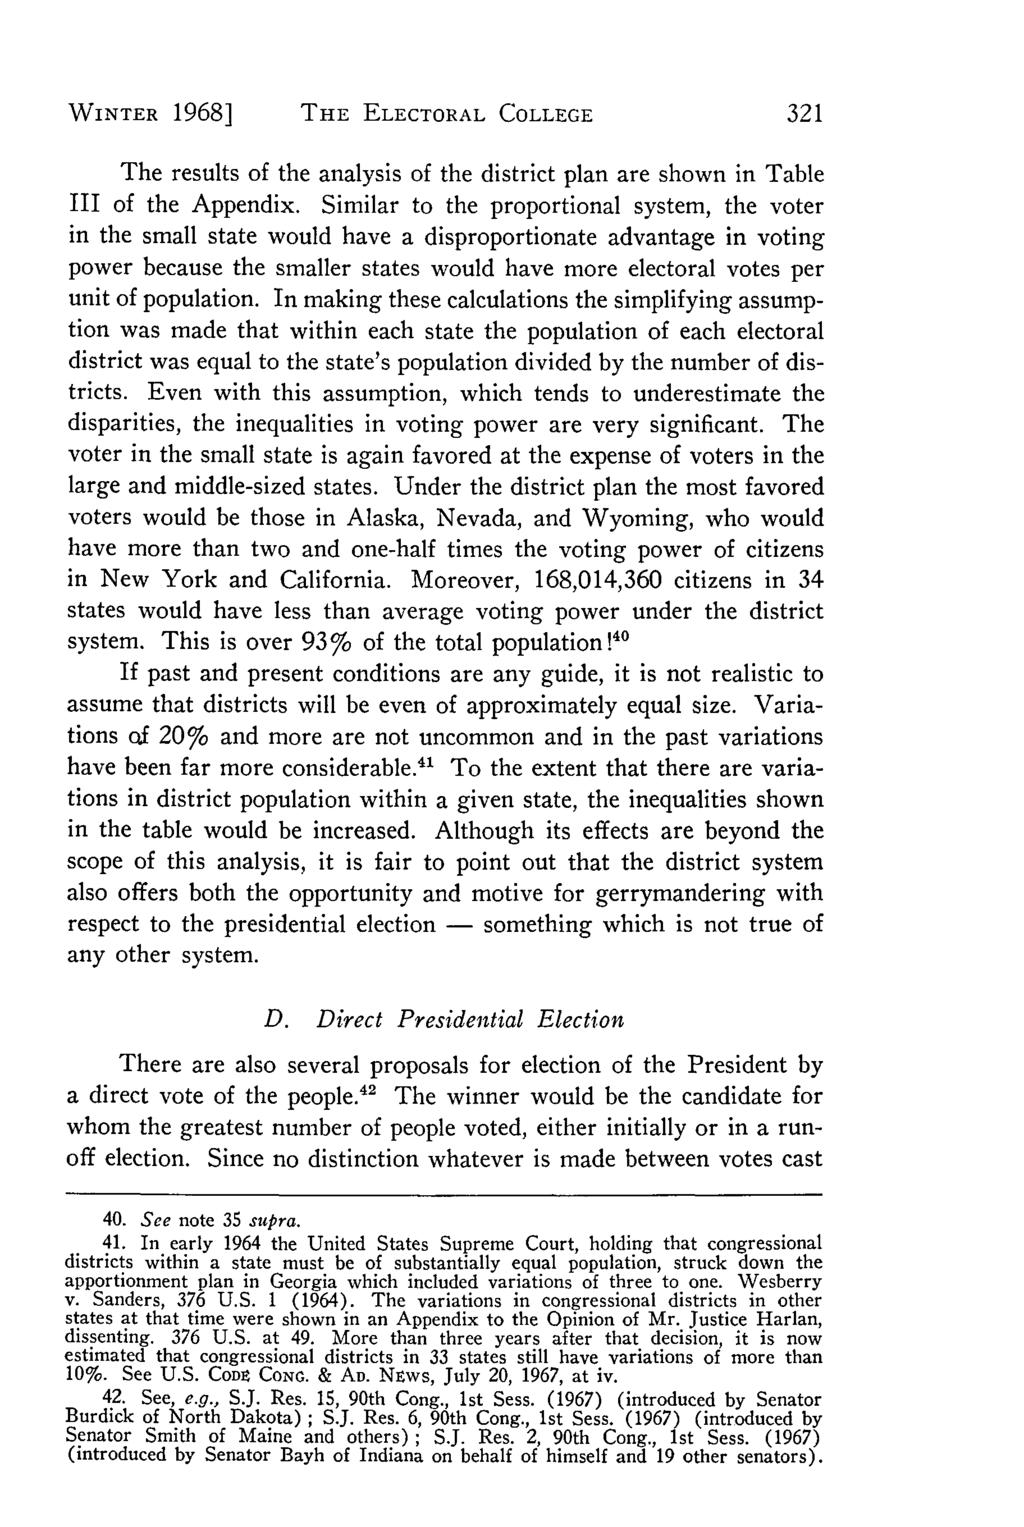 Villanova Law Review, Vol. 13, Iss. 2 [1968], Art. 3 WINTER 1968] THE ELECTORAL COLLEGE The results of the analysis of the district plan are shown in Table III of the Appendix.